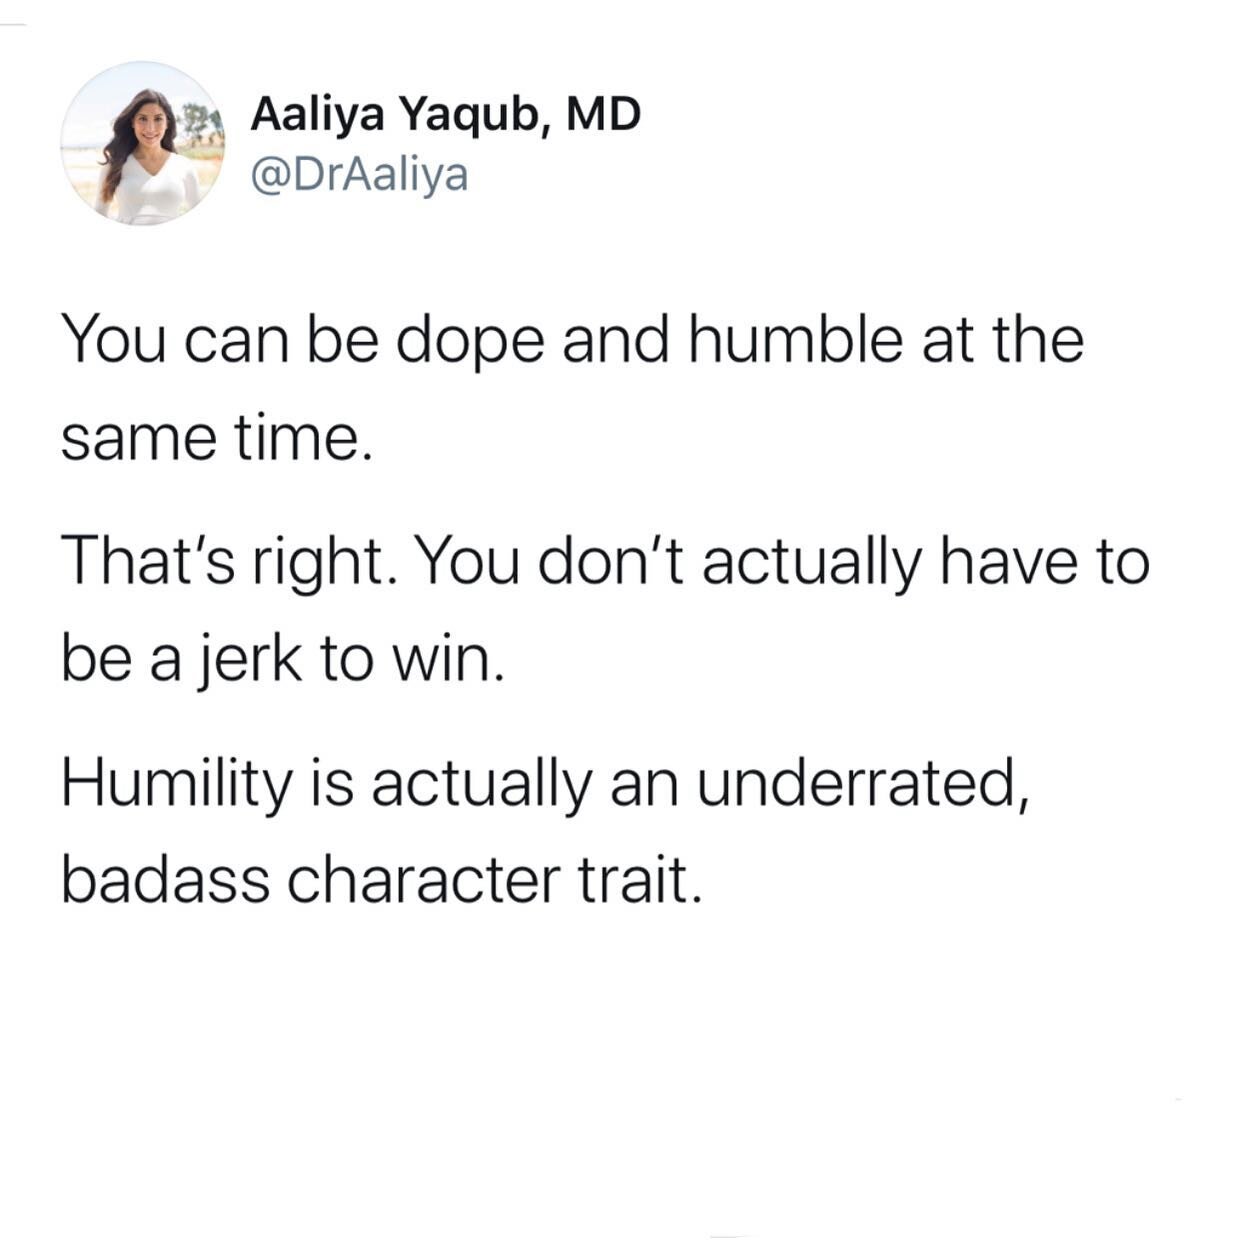 Tap twice if you Agree. Humility is one of the greatest character traits. And I&rsquo;d argue that it is often one that leads to fulfillment. The more humble you are, the more grateful you are&mdash; the more fulfilled you are. It&rsquo;s an upward s